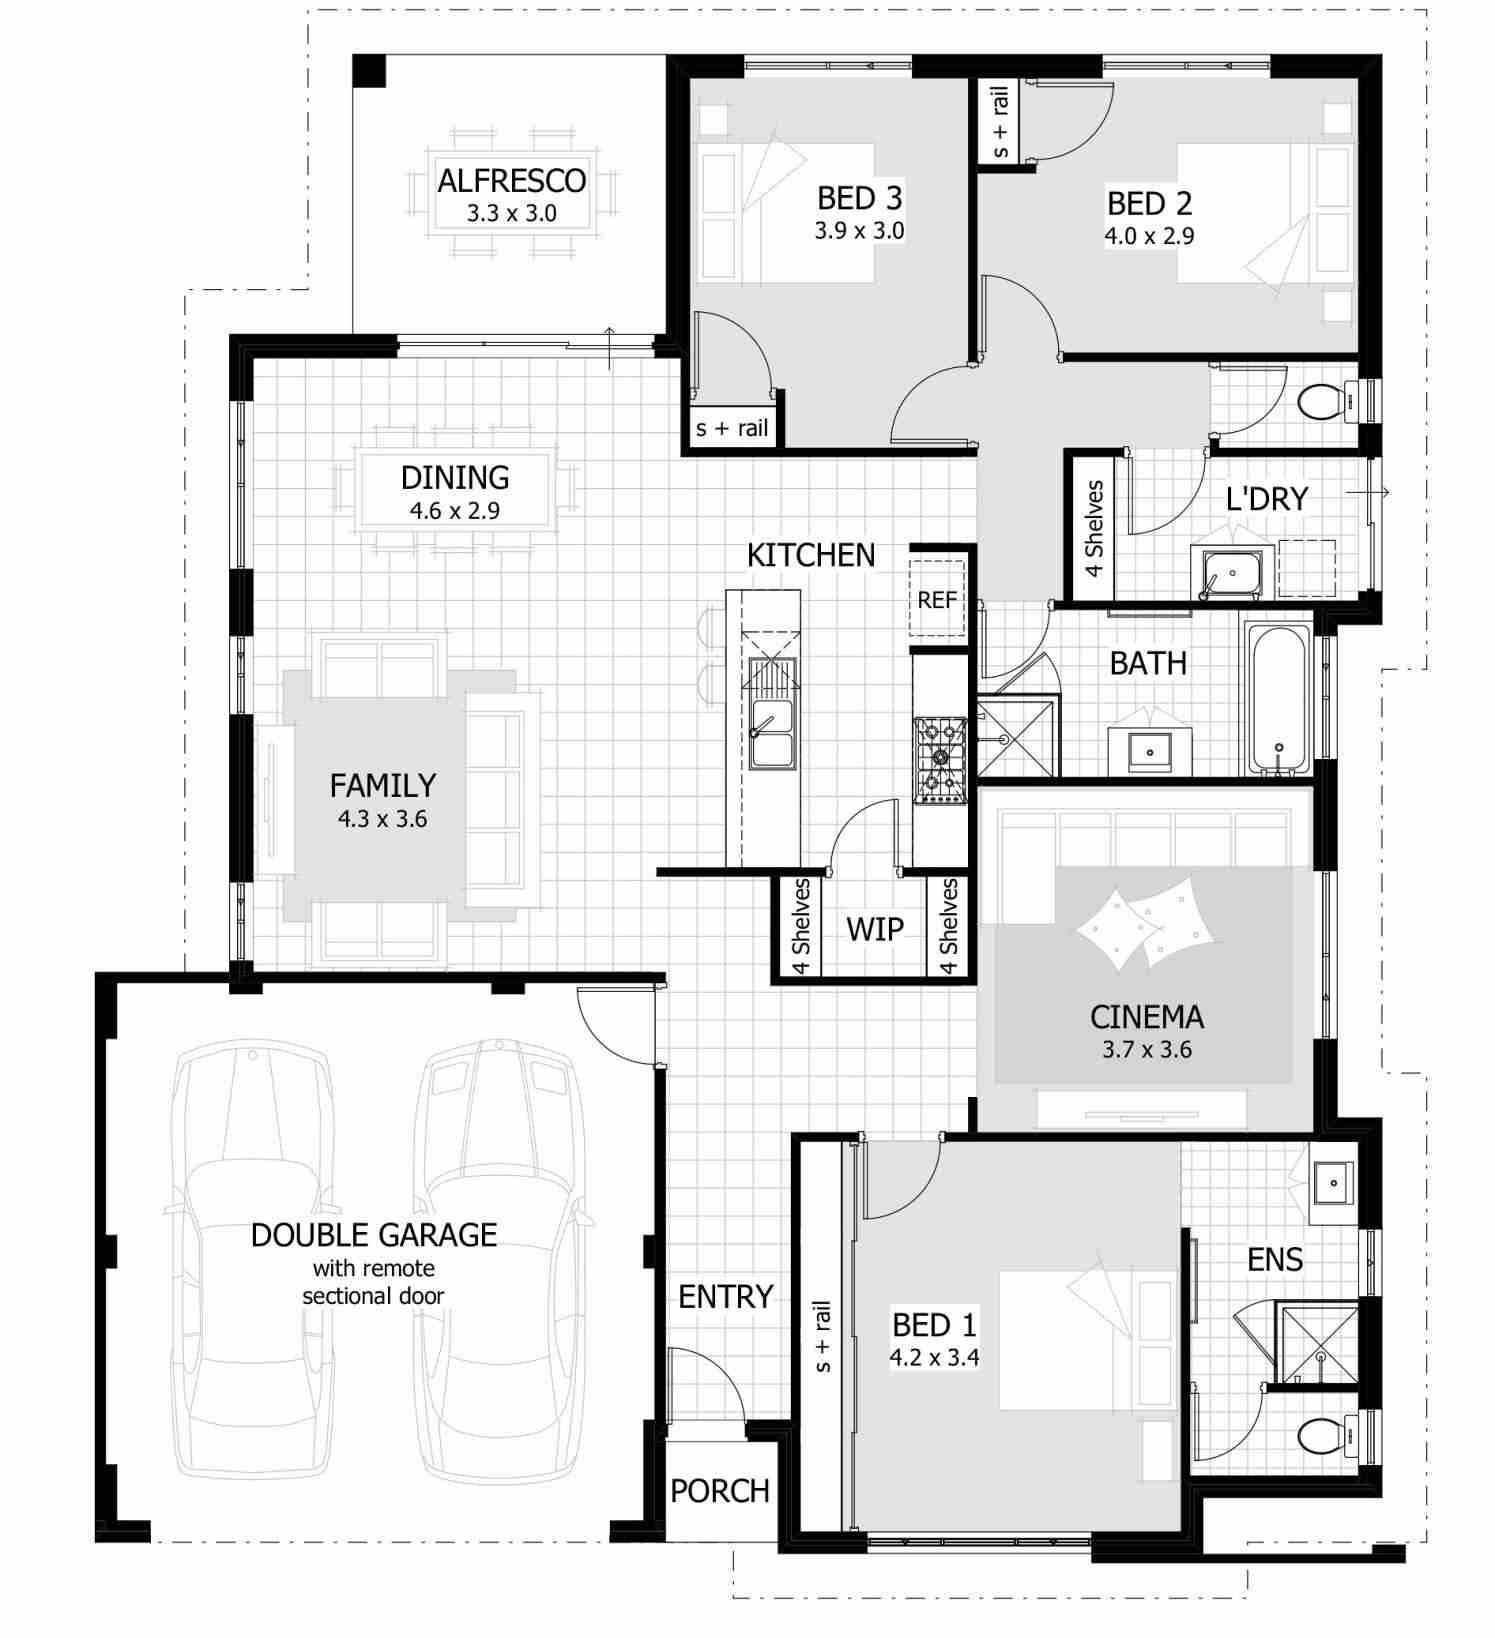 3 bedroom house plans with garage result for bedroom house